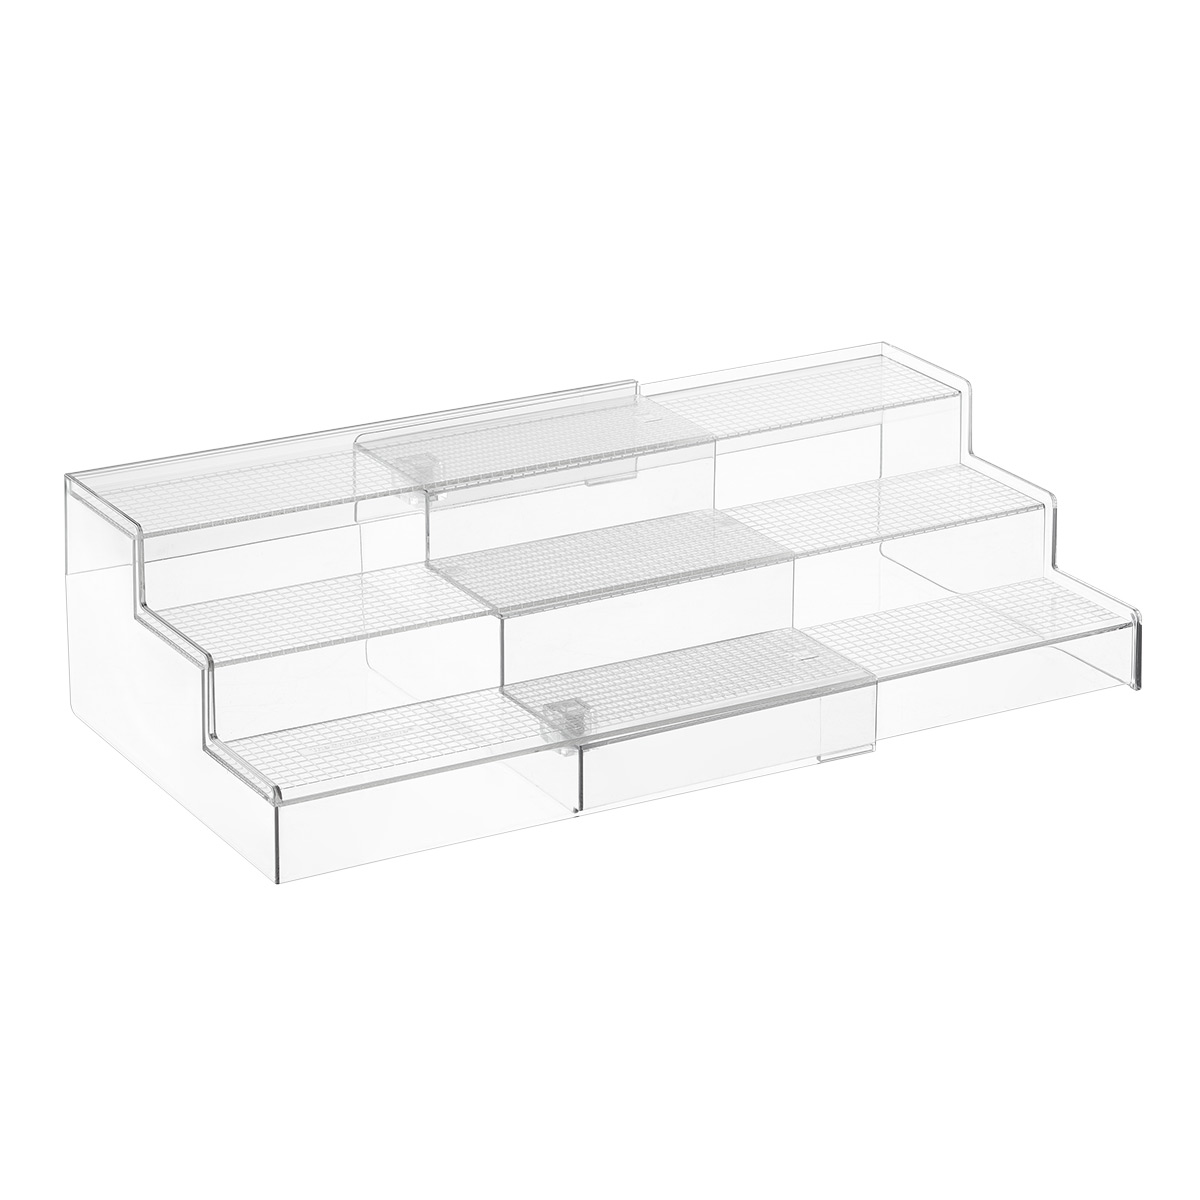 https://www.containerstore.com/catalogimages/470633/10090075-3-tier-drawered-organizer-l.jpg